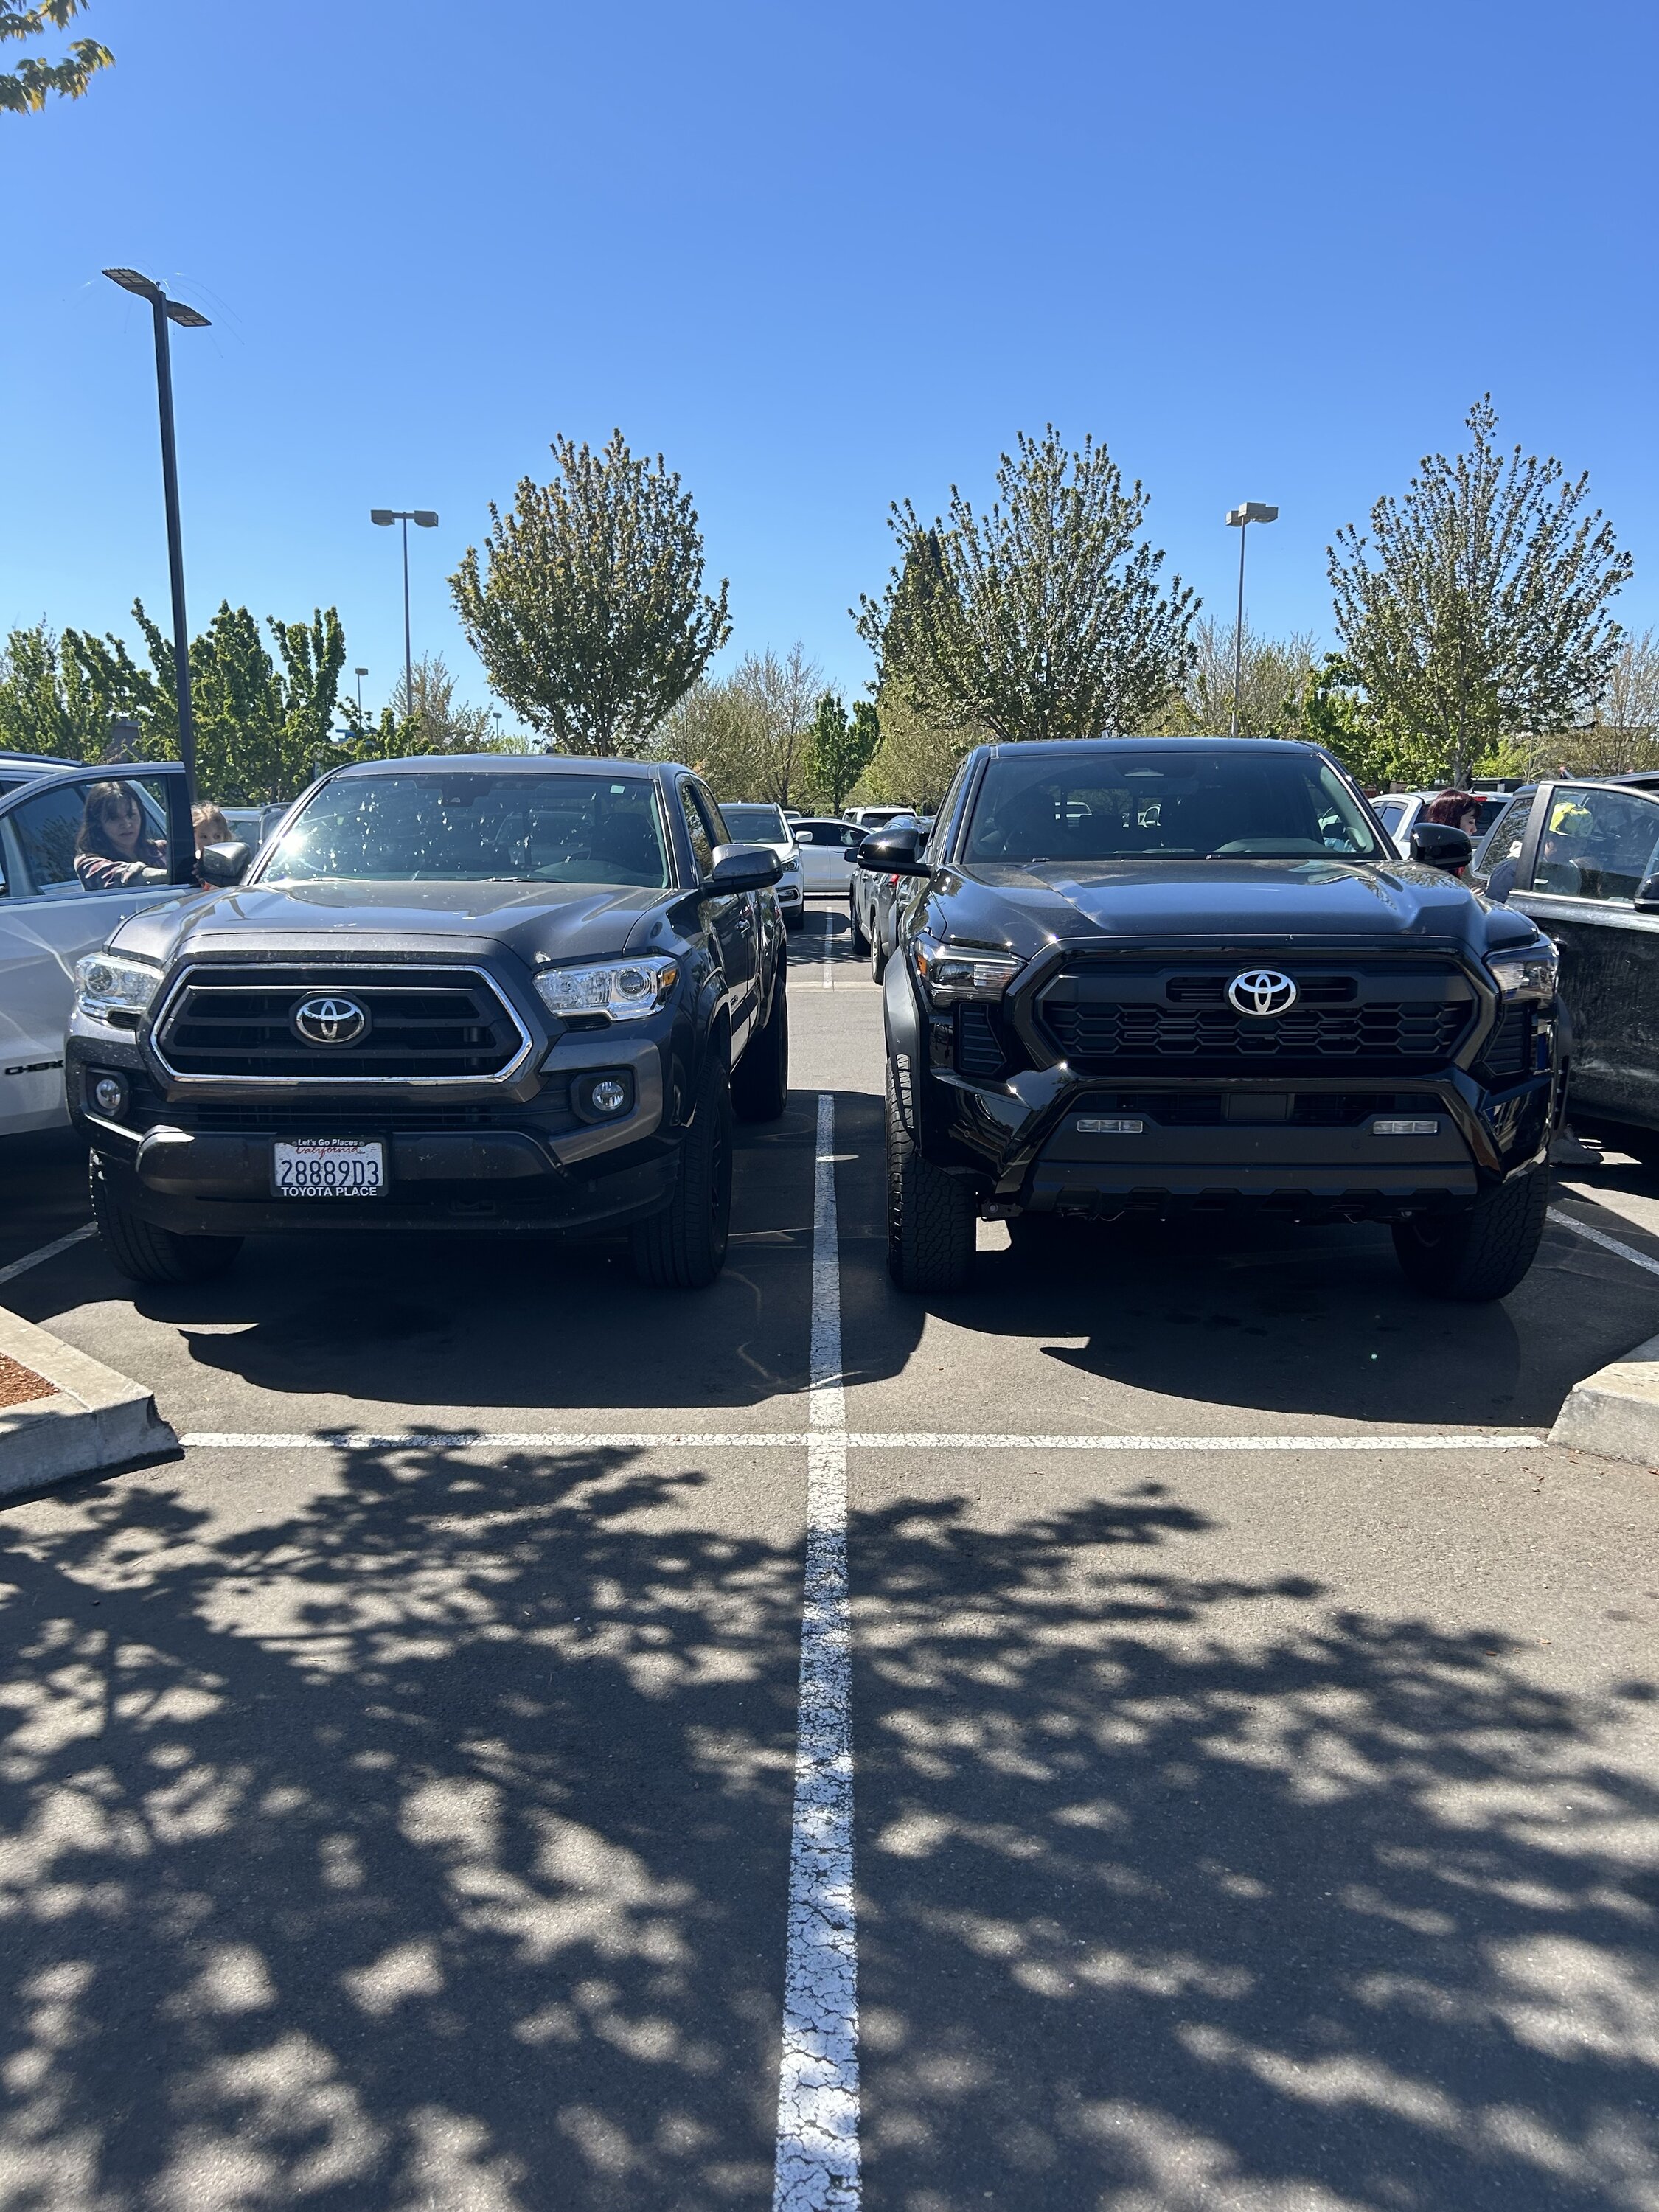 2024 Tacoma Side by Side Comparison: 4th Gen vs 3rd Gen Tacoma IMG_3597